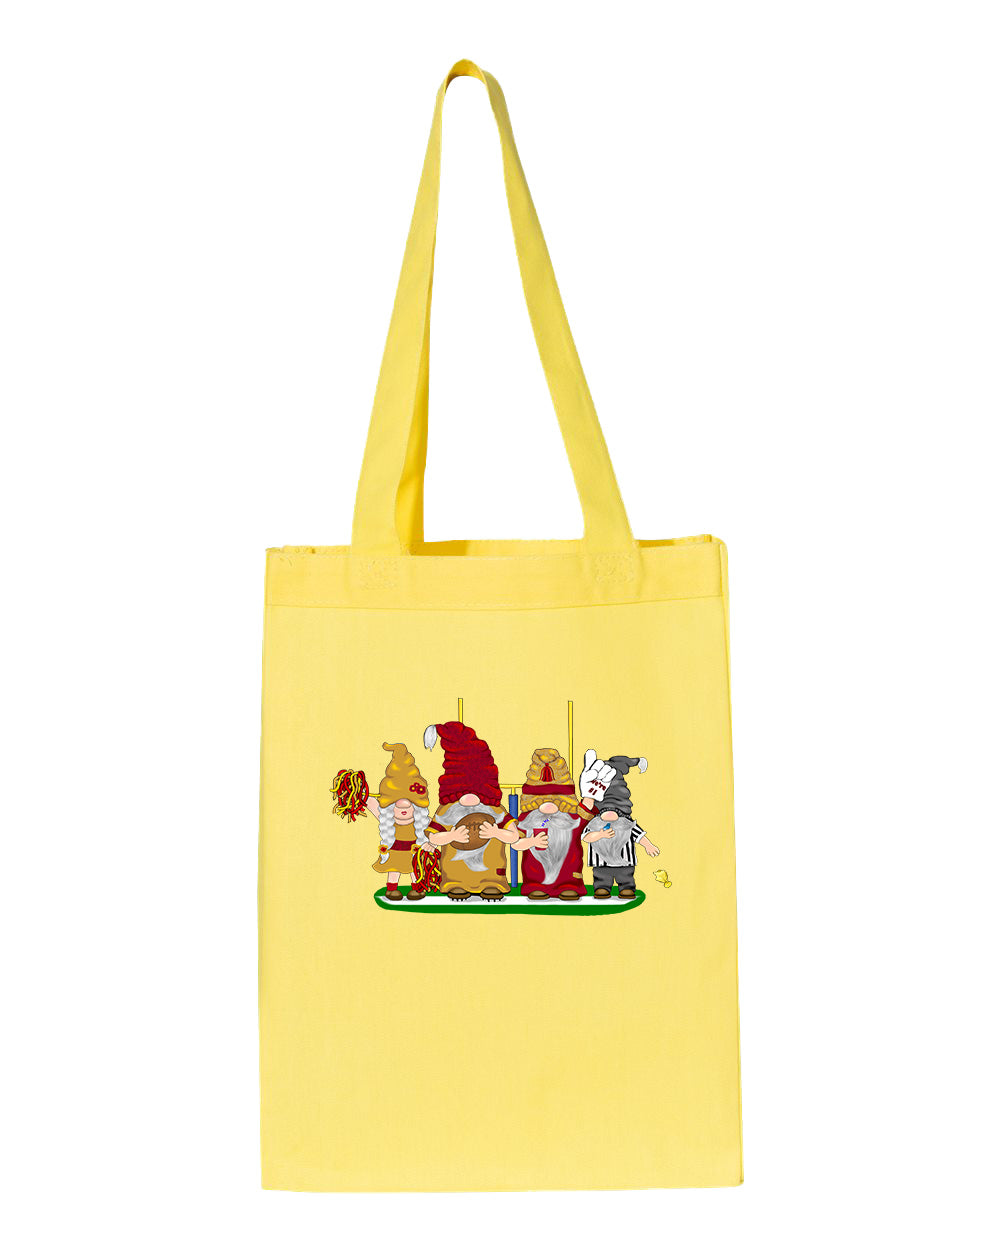 Burgundy & Gold Football Gnomes  (similar to DC) on Gusset Tote